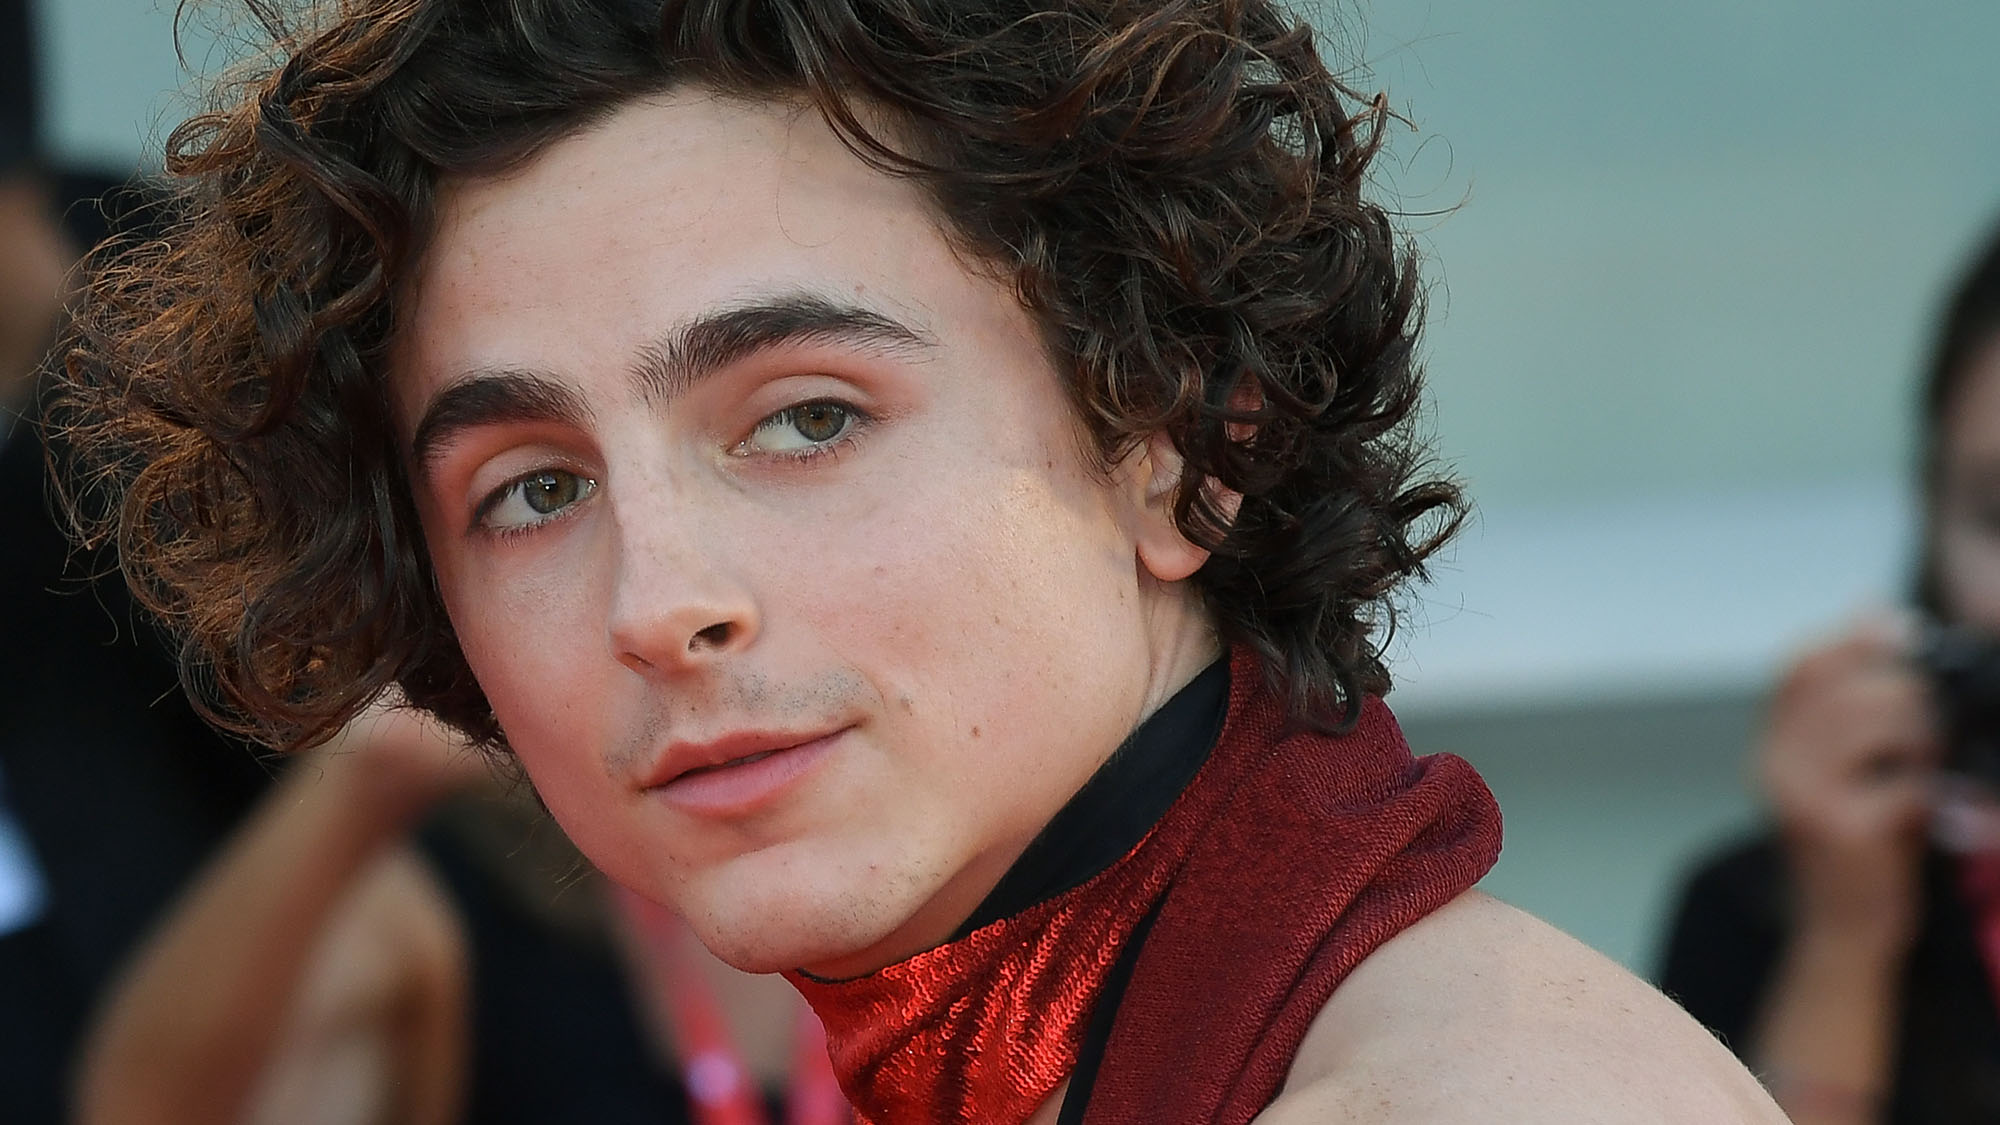 Societal collapse is in the air': Timothée Chalamet on cannibal